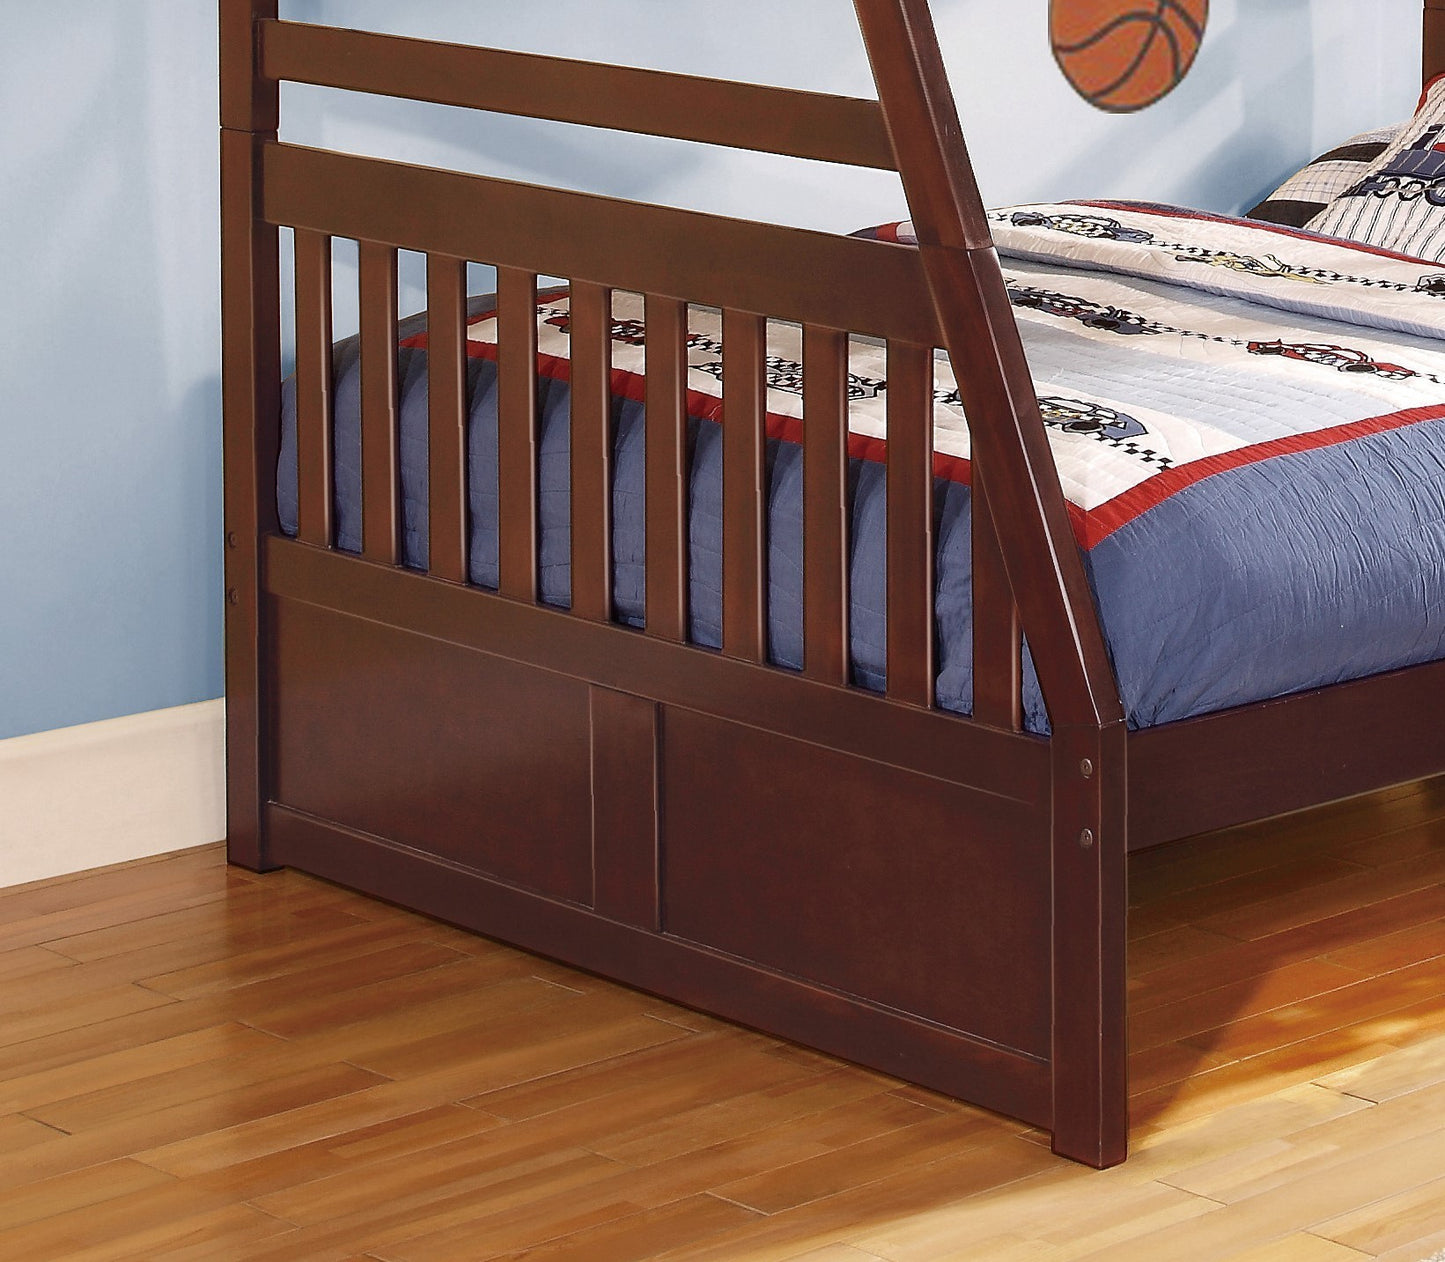 Transitional Dark Cherry Twin/Full Bunk Bed